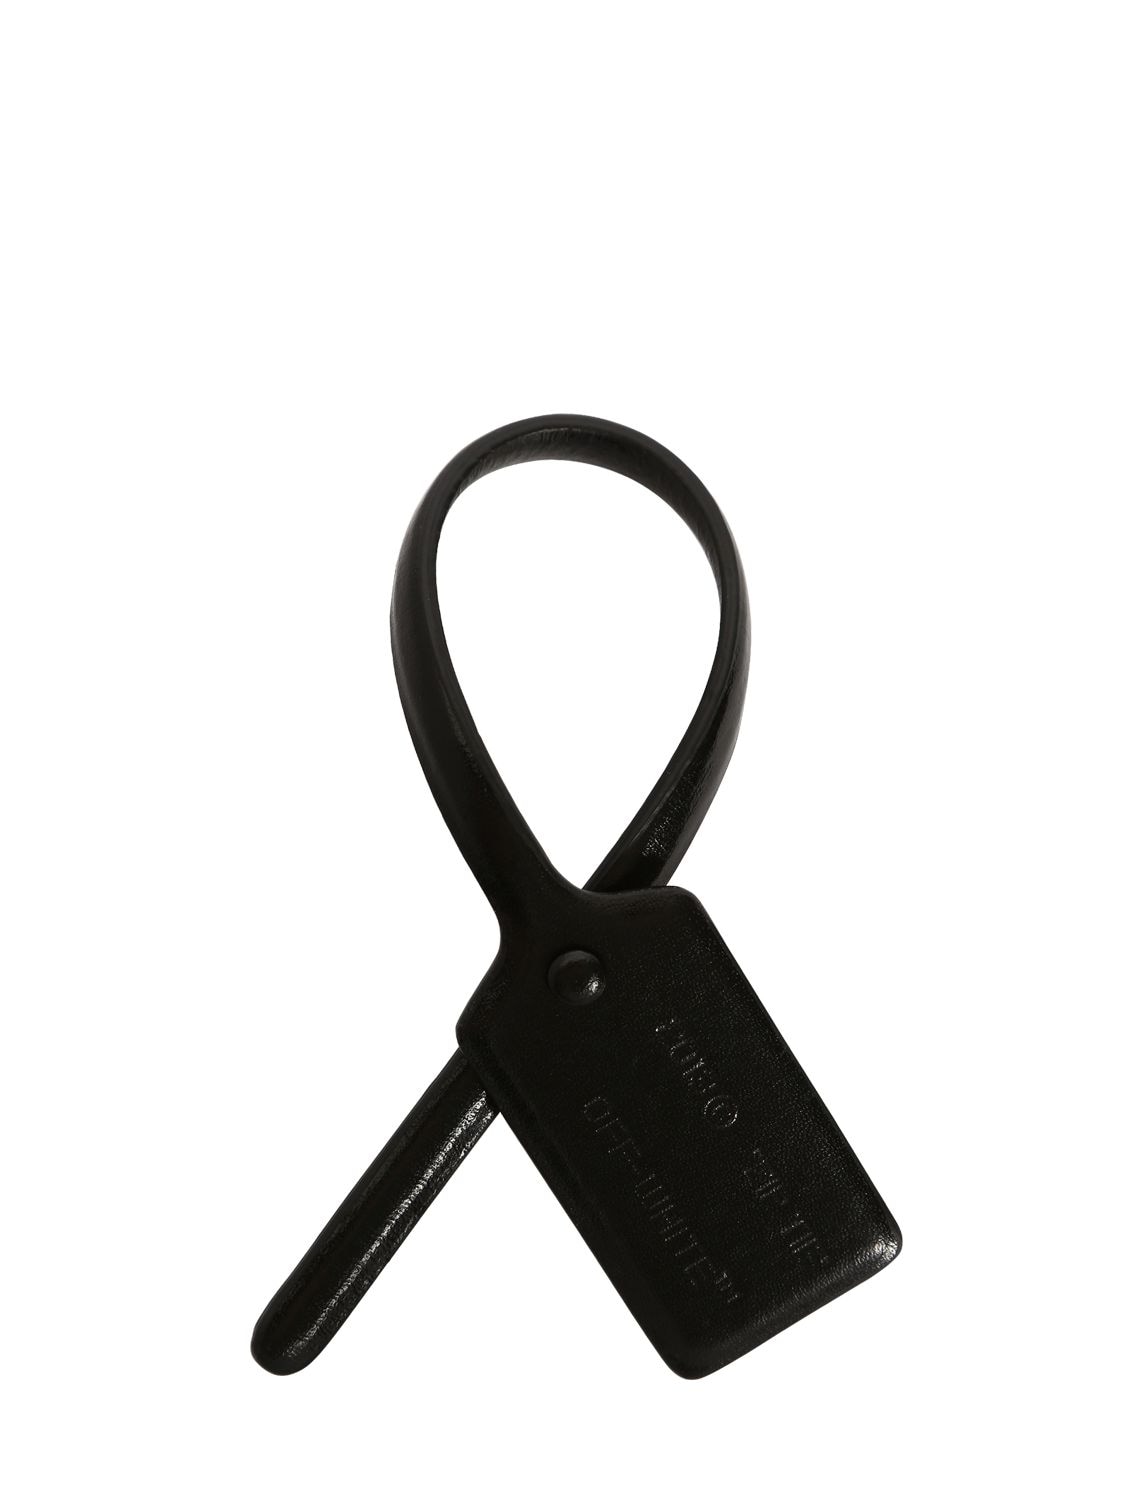 OFF-WHITE PATENT LEATHER ZIP TIE CHARM,70IW6X054-MTAWMA2